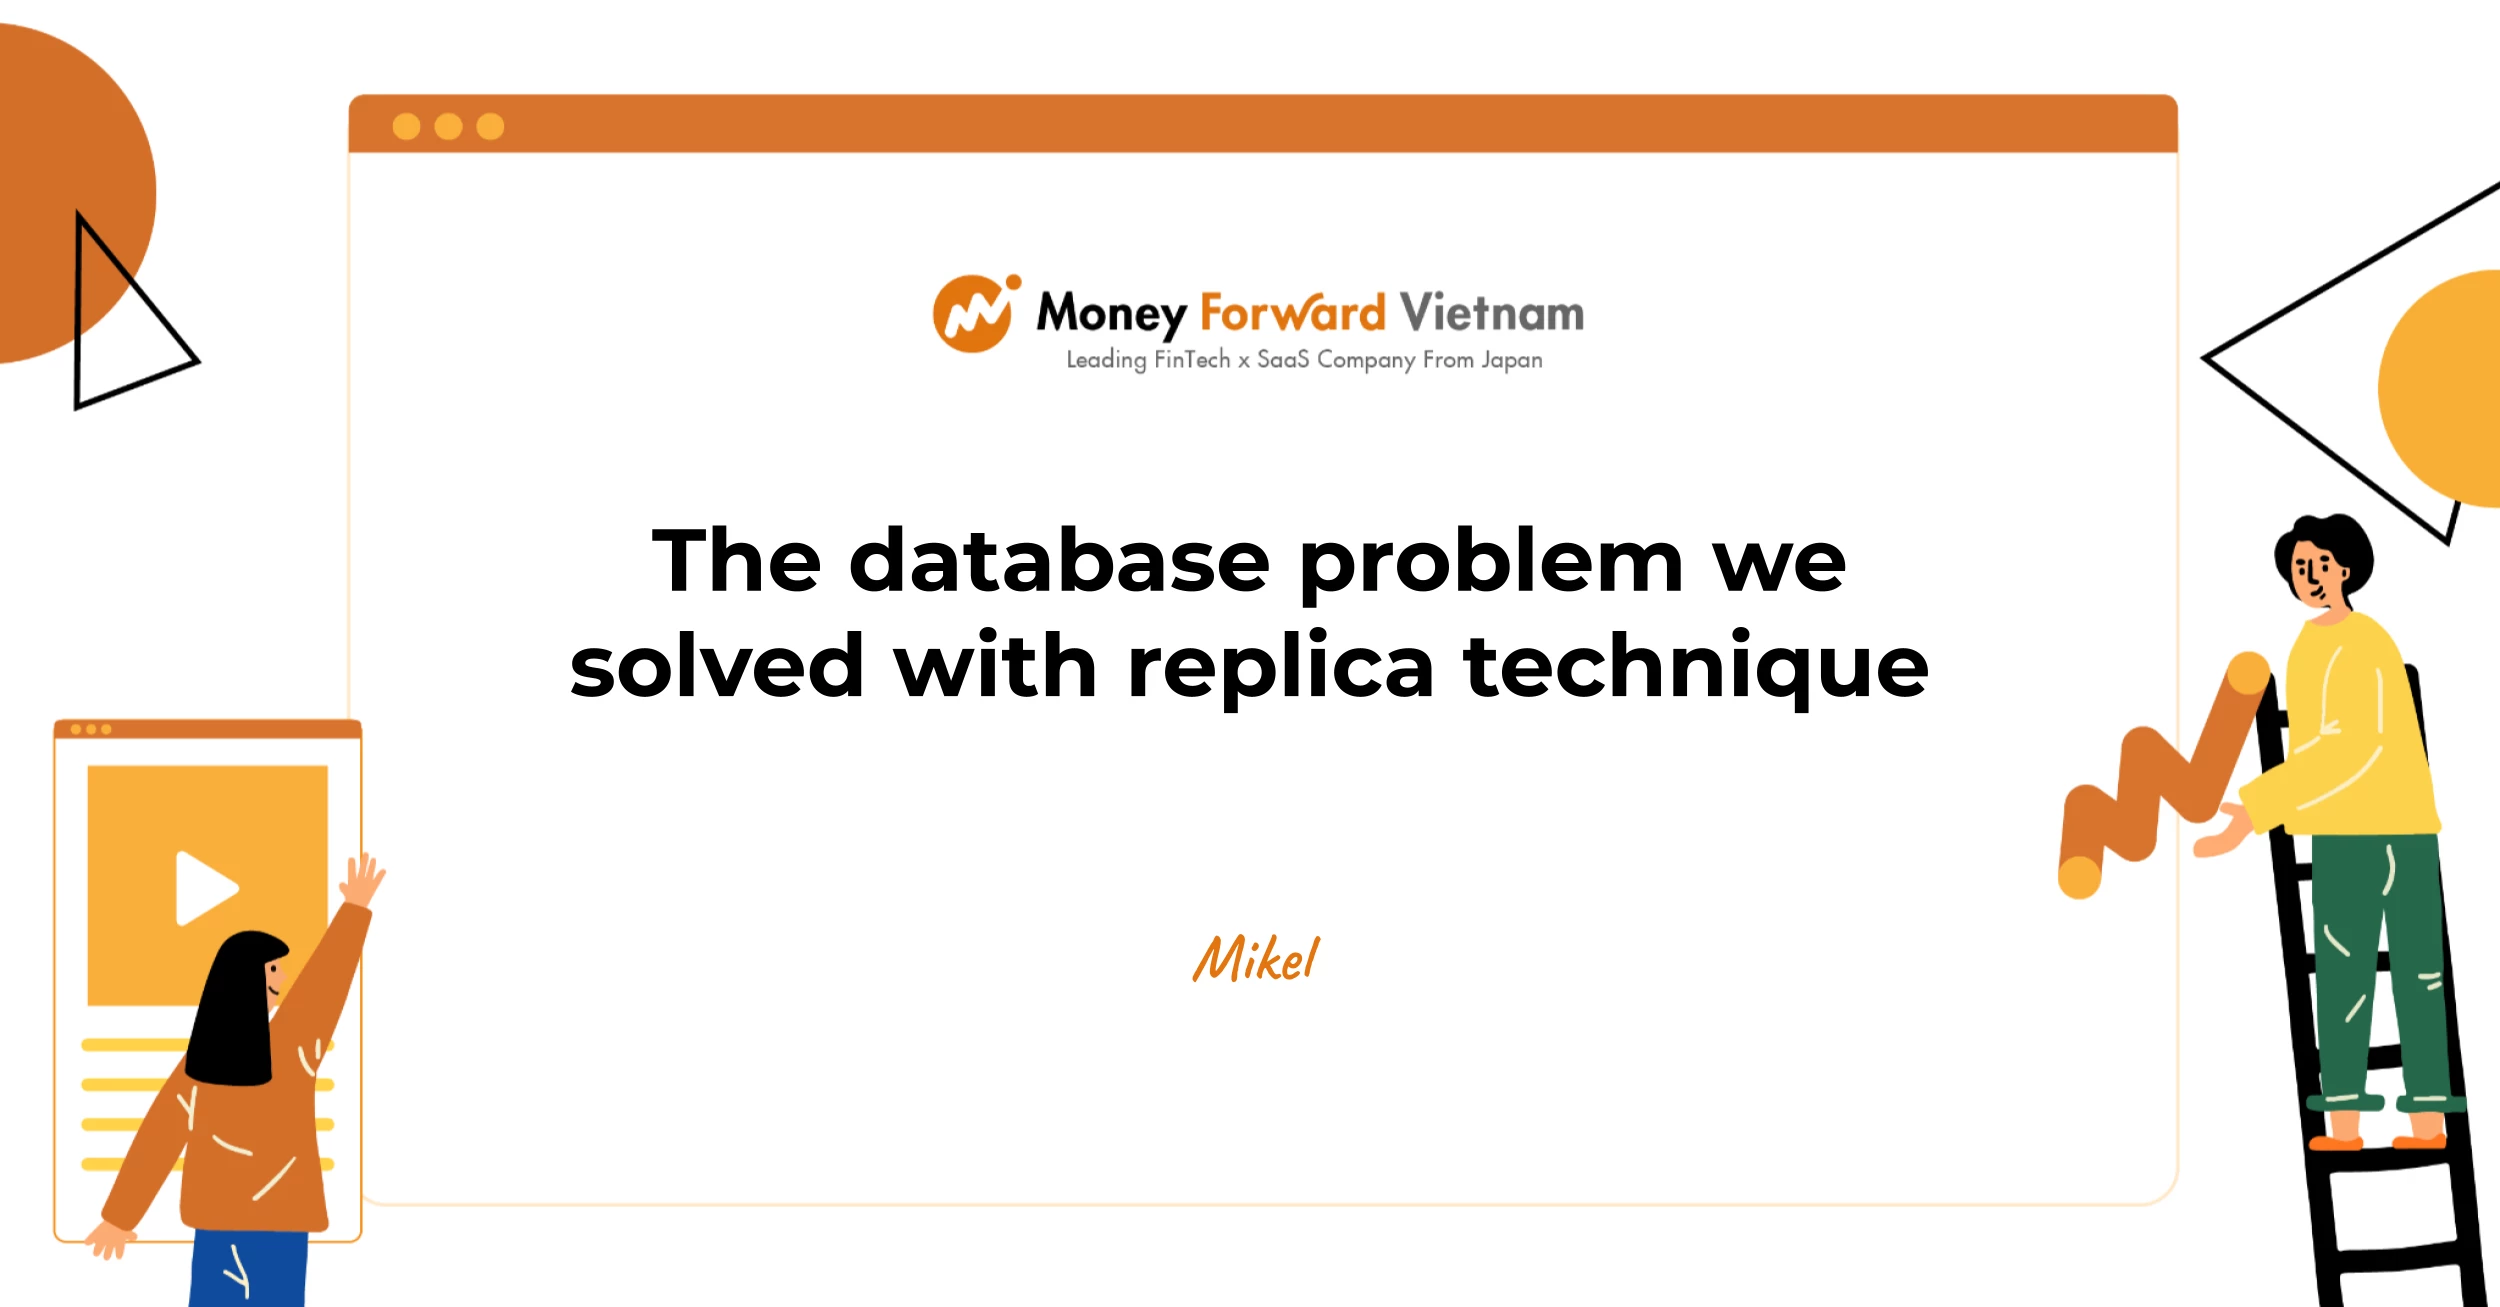 The database problem we solved with replica technique